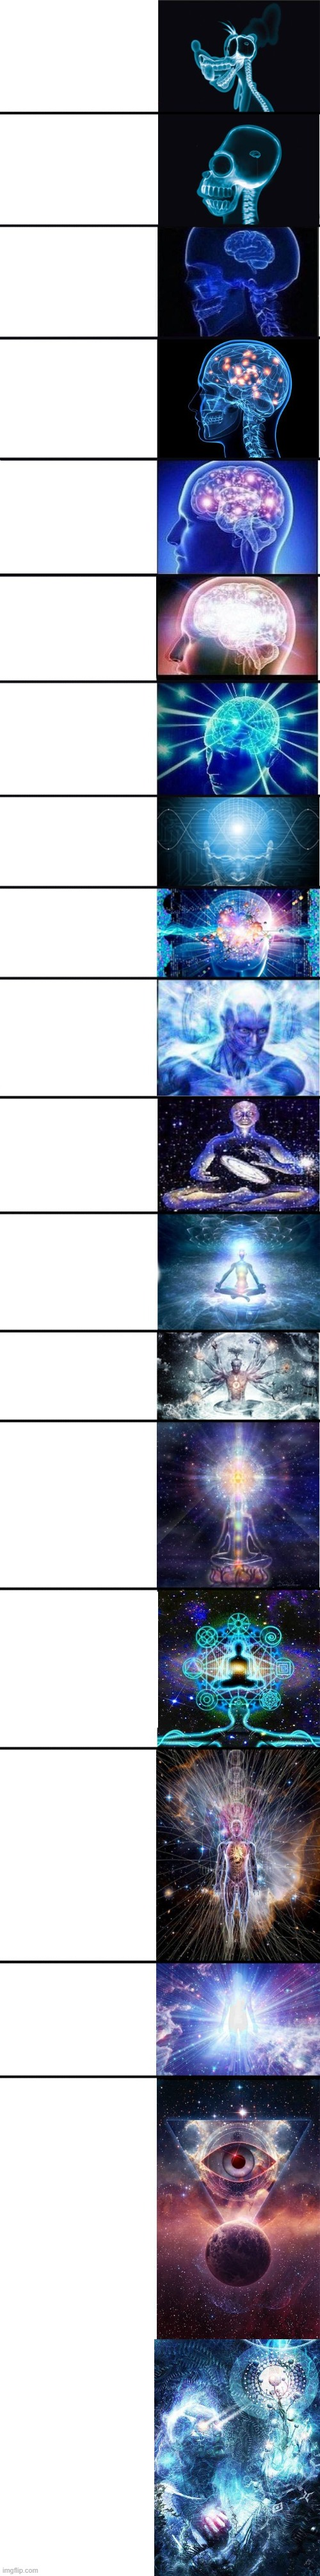 High Quality expanding brain 13 stages Blank Meme Template